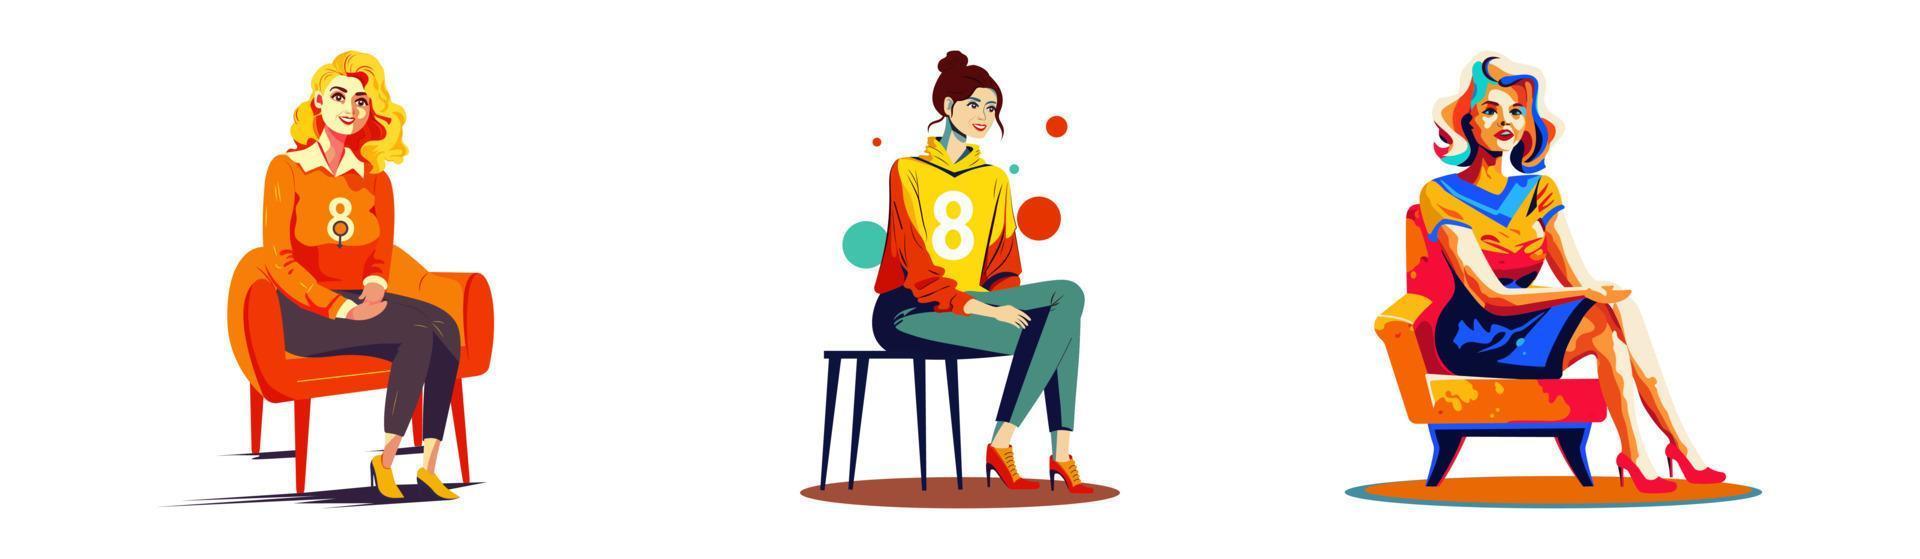 Three Fashionable Young Women Characters Sitting On Chair. vector